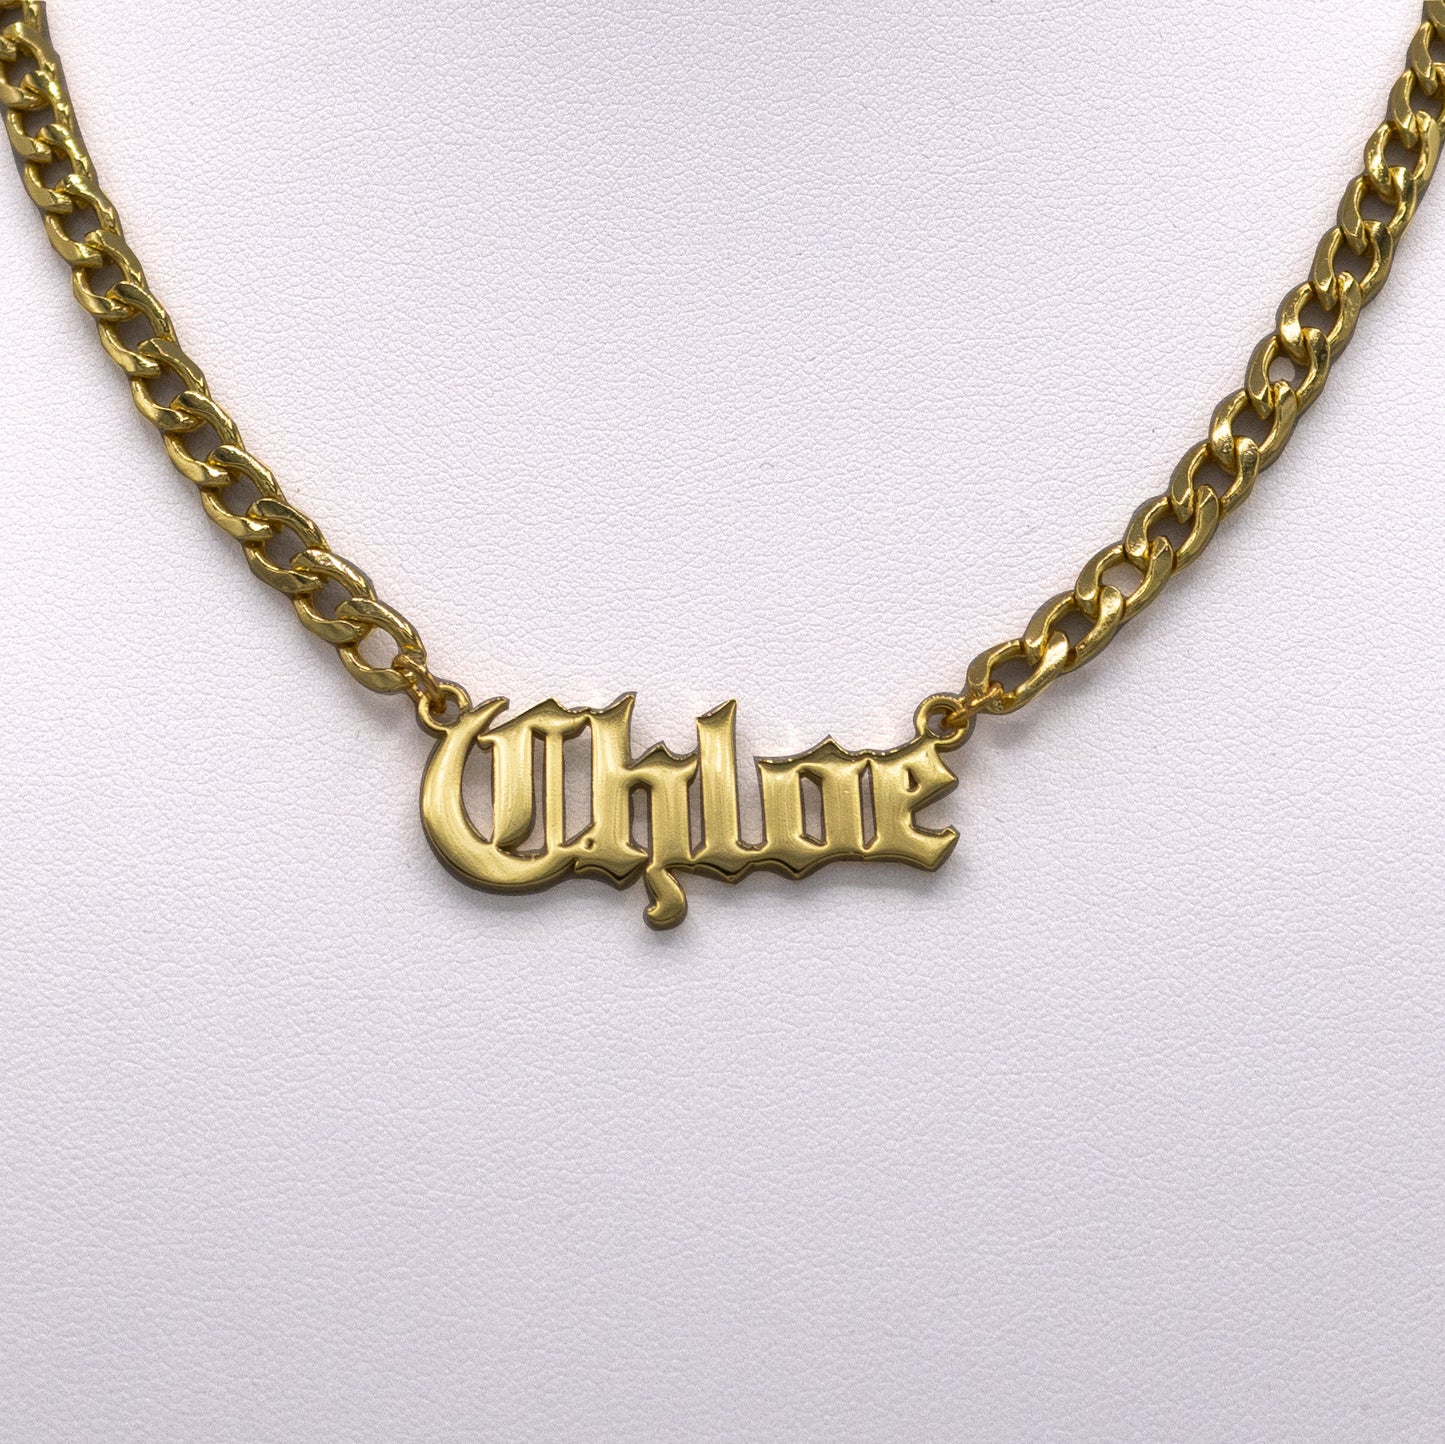 Personalised Name Necklace - Chloe Font